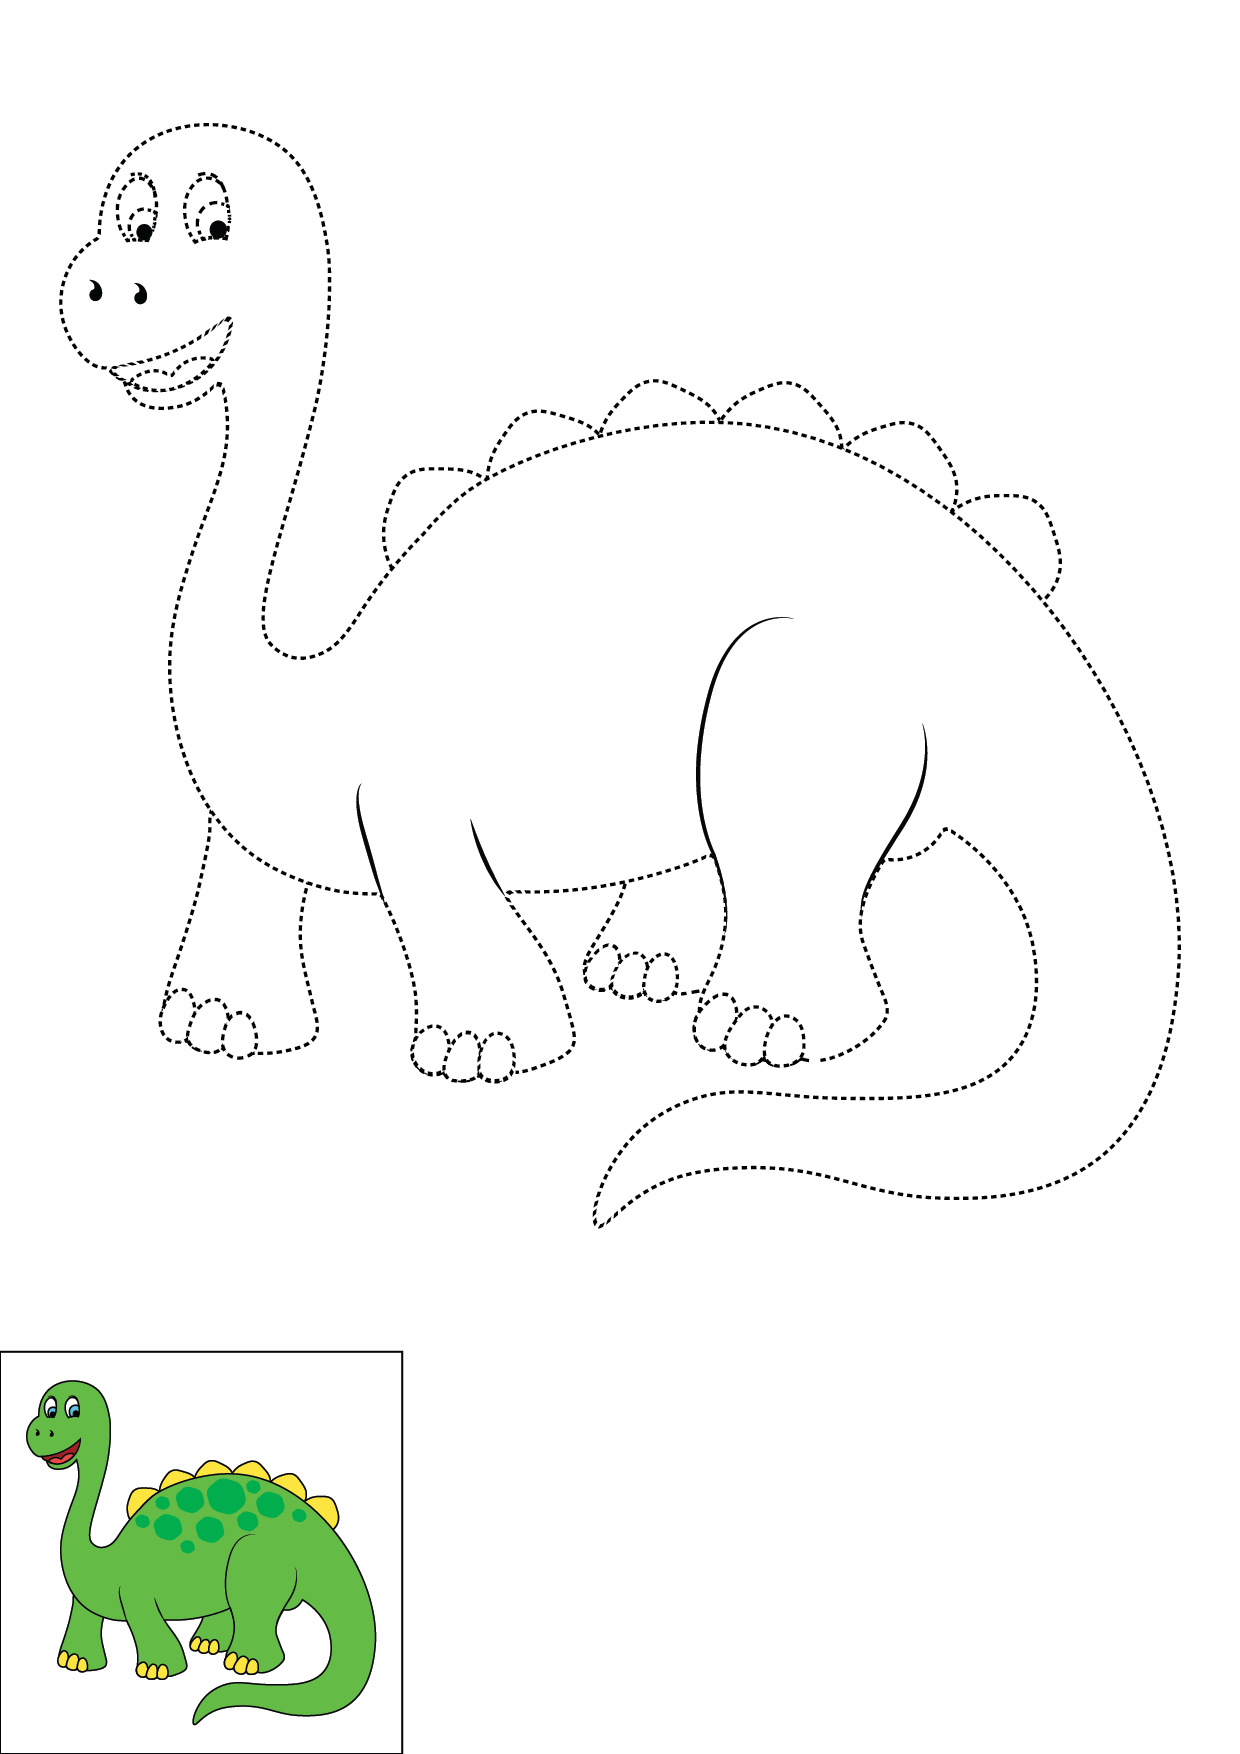 How to Draw A Dinosaur Step by Step Printable Dotted